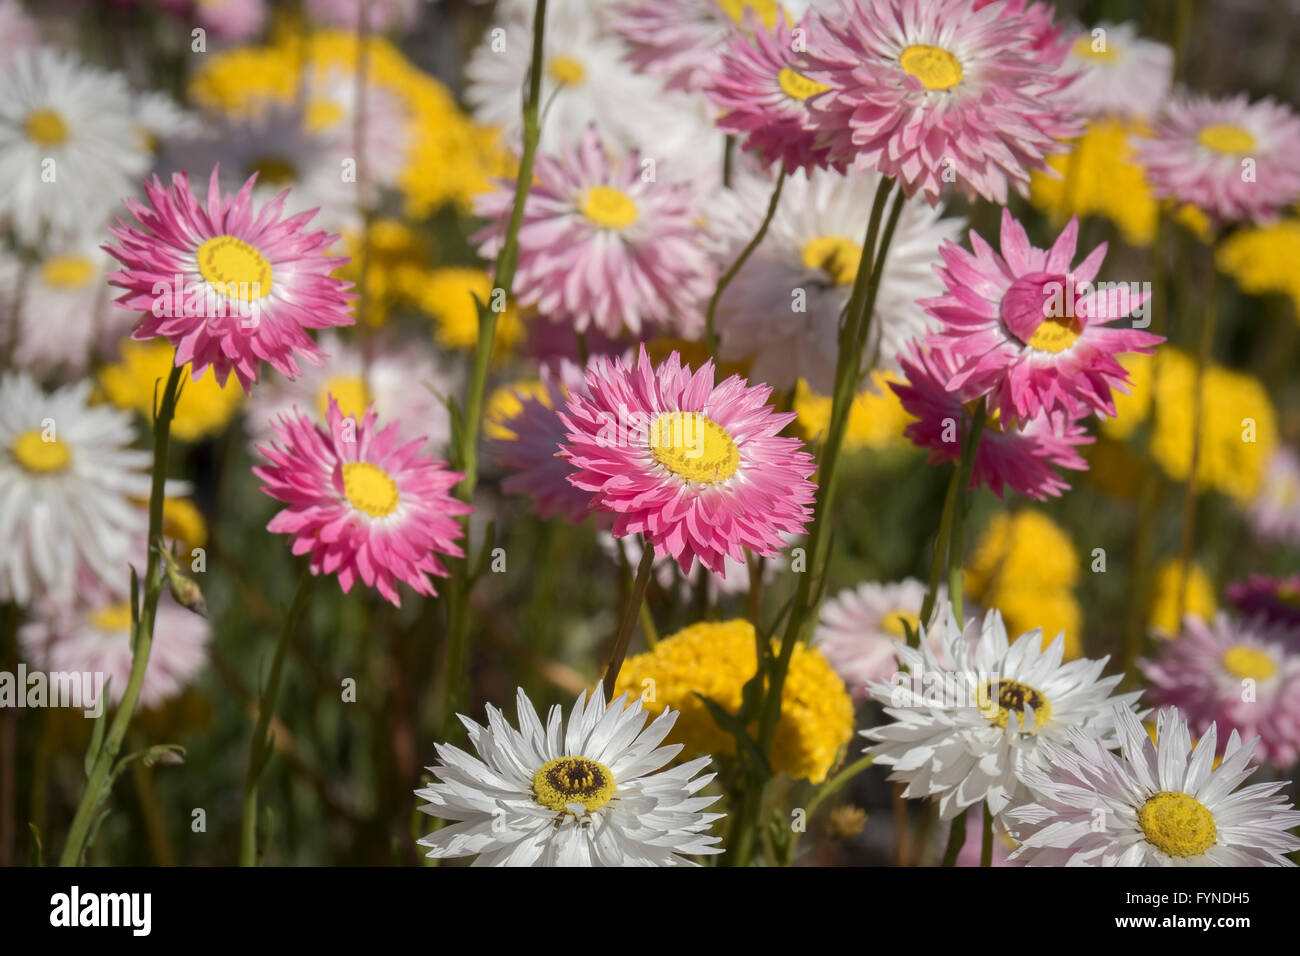 Paper Daisys, Pink Spring Flowers, Kings Park, The City of Perth, Western Australia Stock Photo